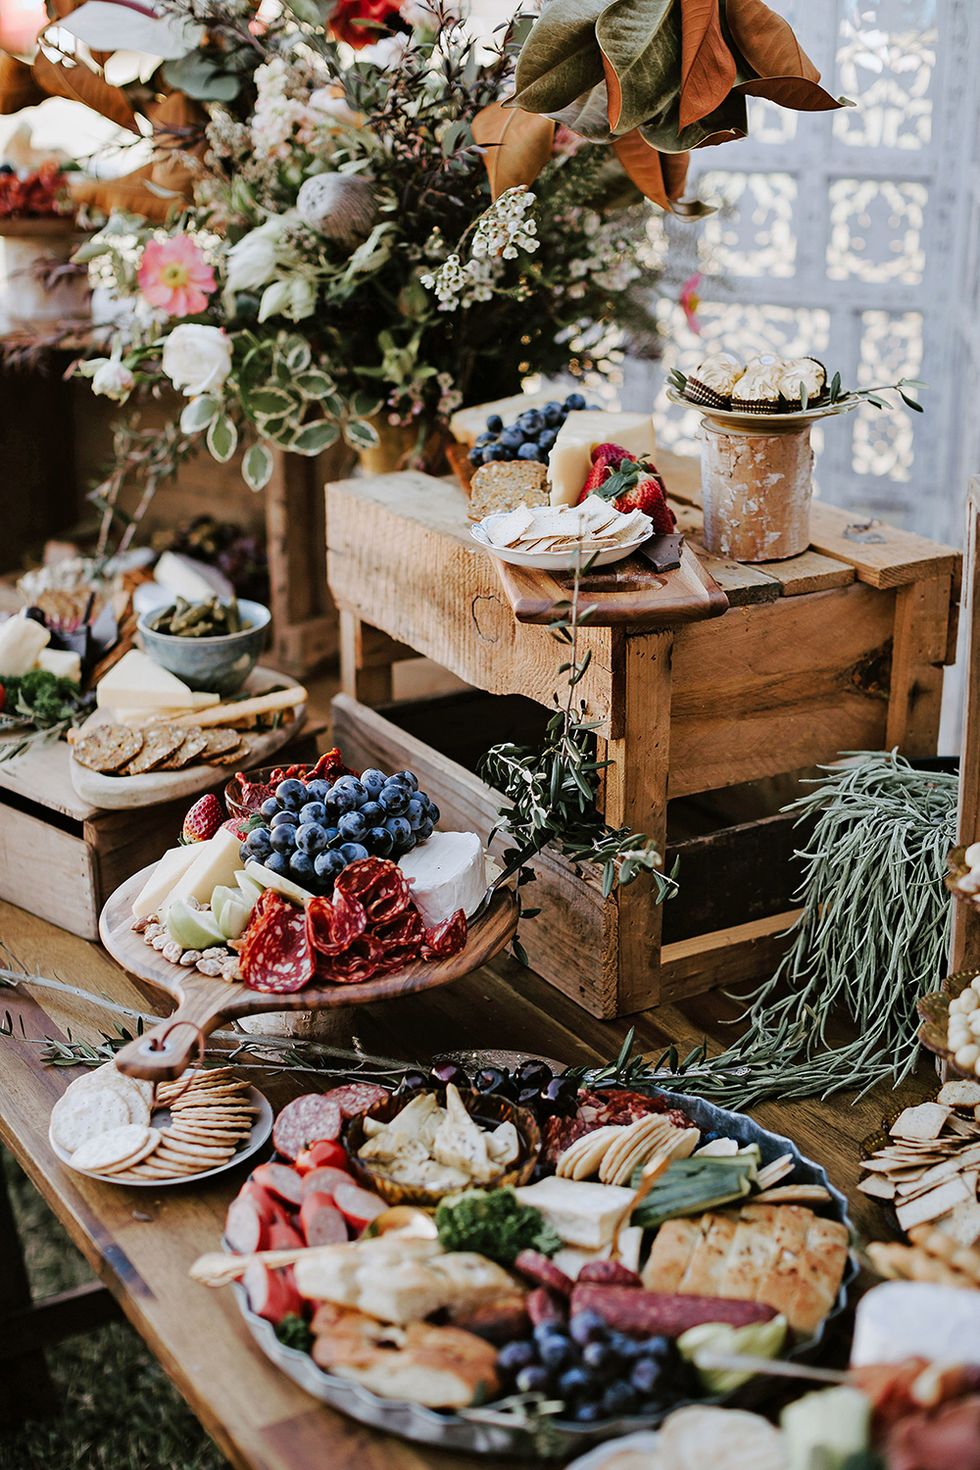 photo of snack table at wedding